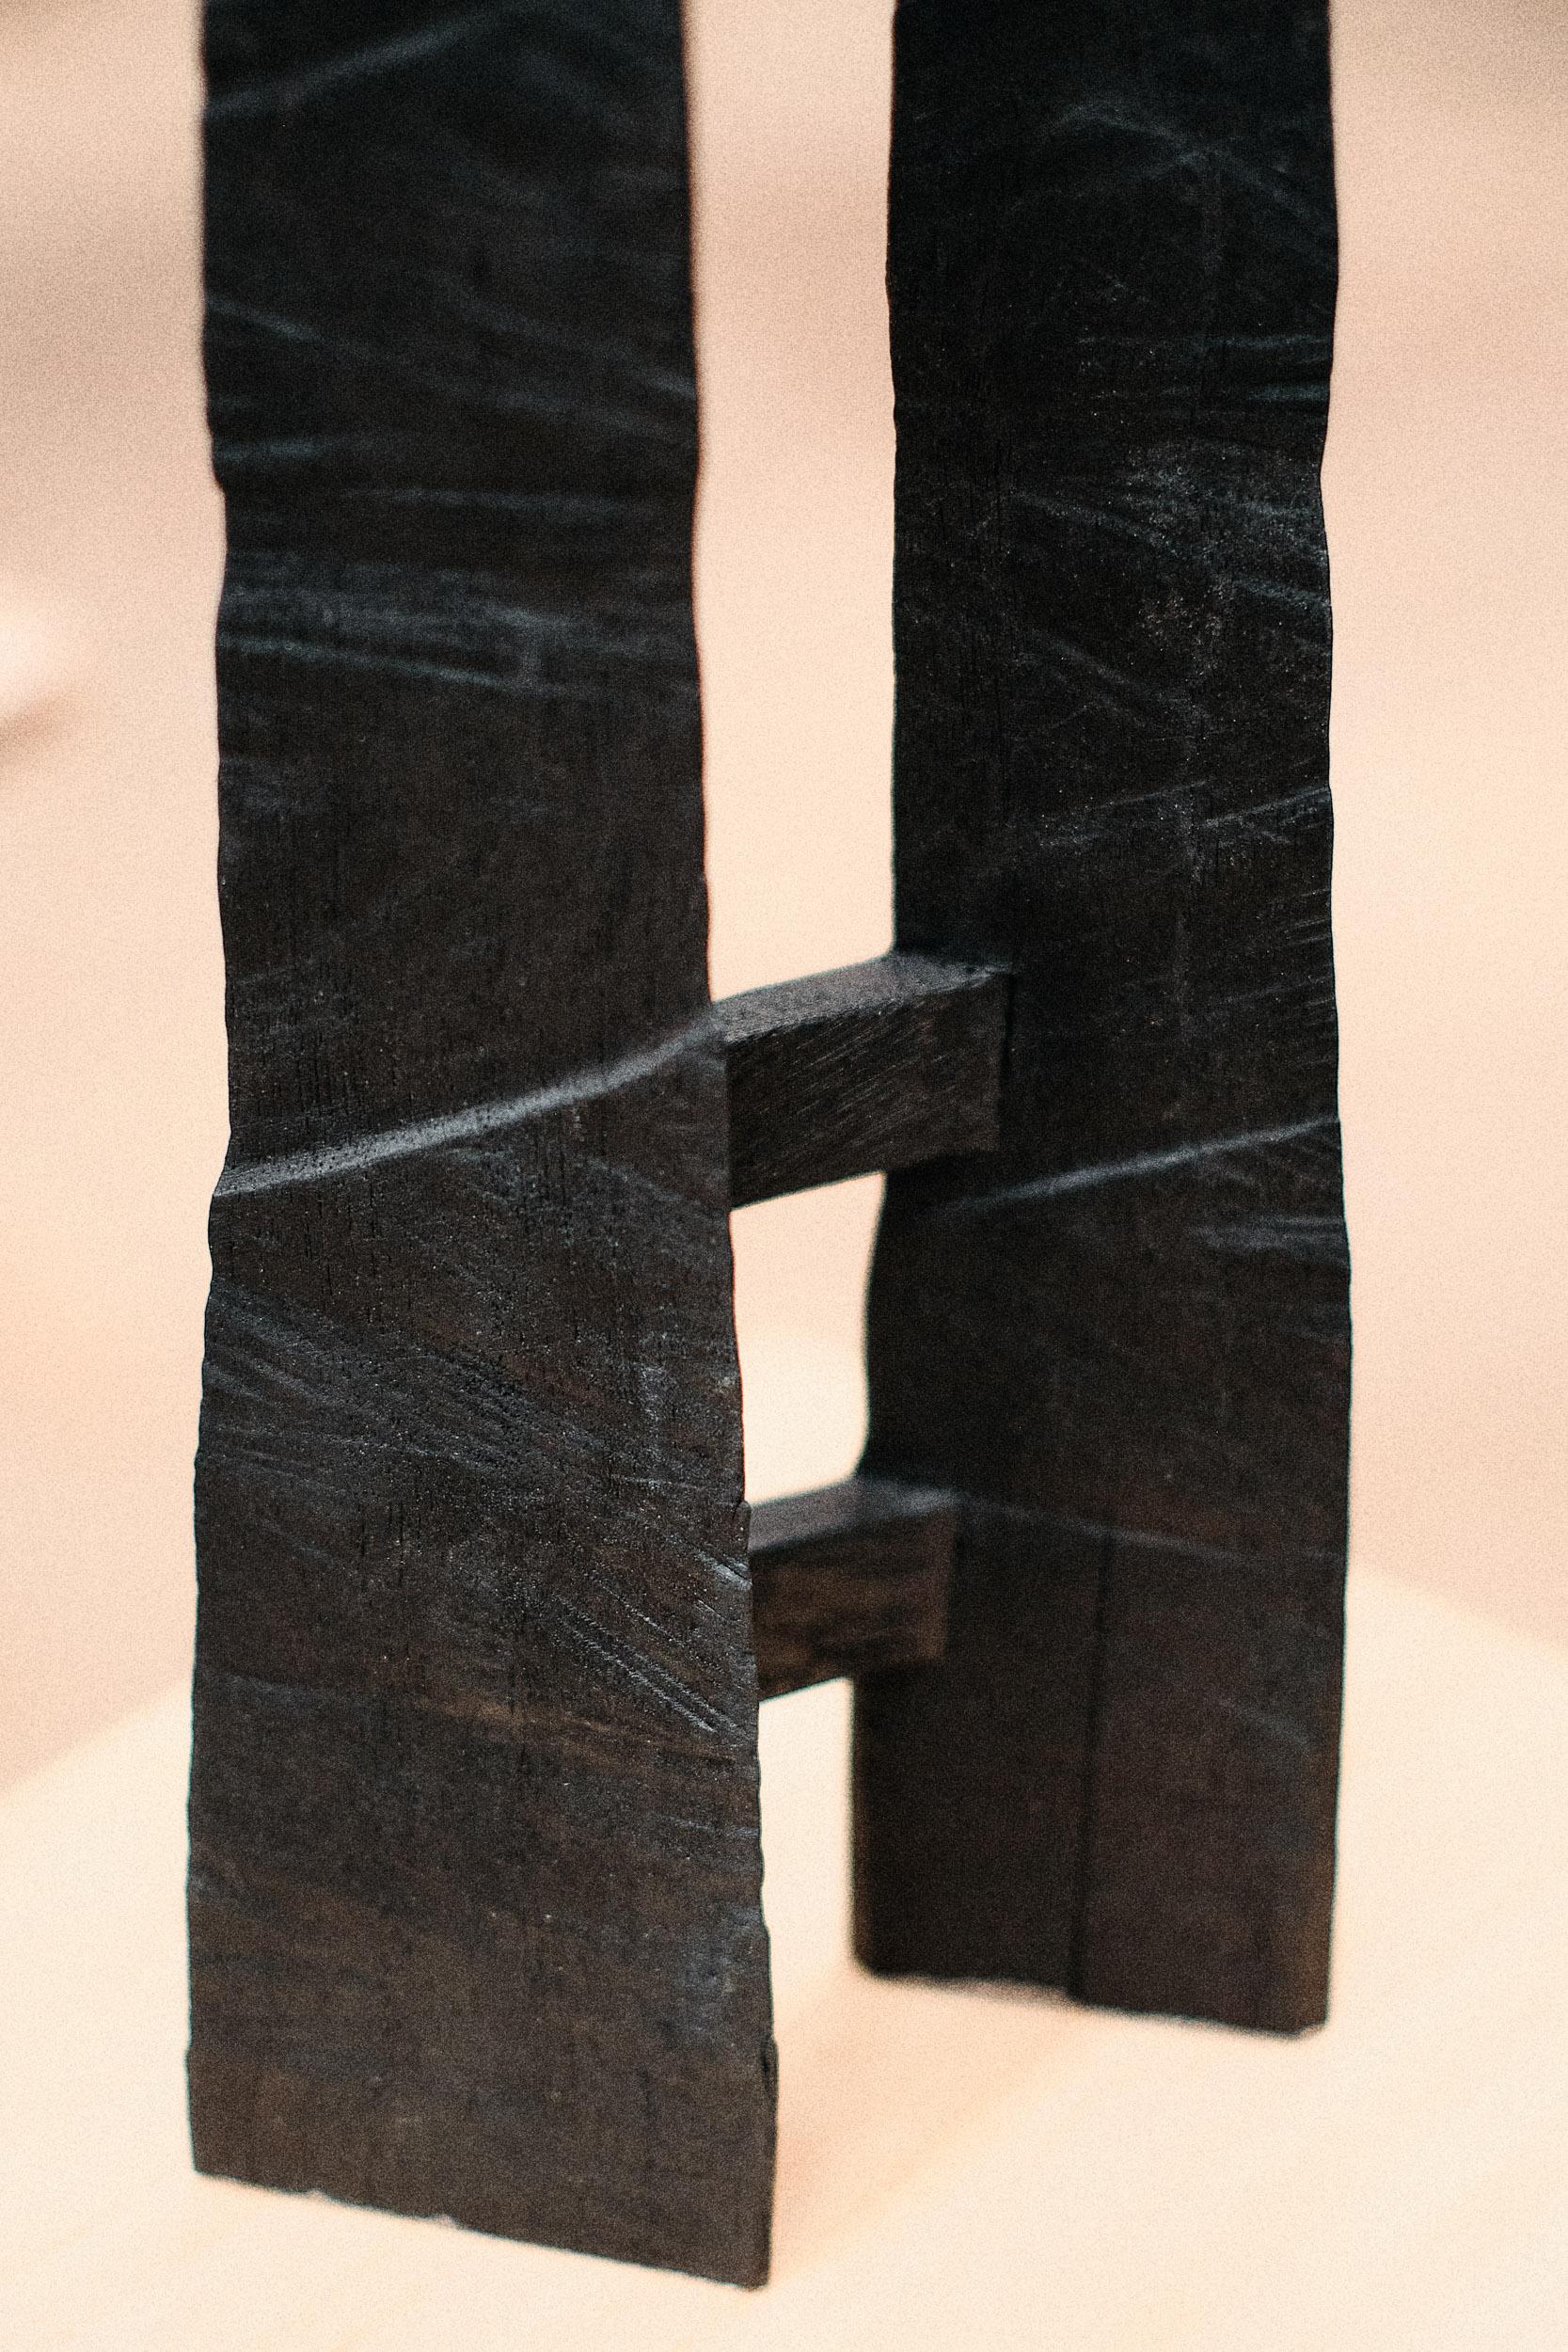 'Space Between' Wooden Sculpture by Camilo Andres Rodriguez Marquez For Sale 16